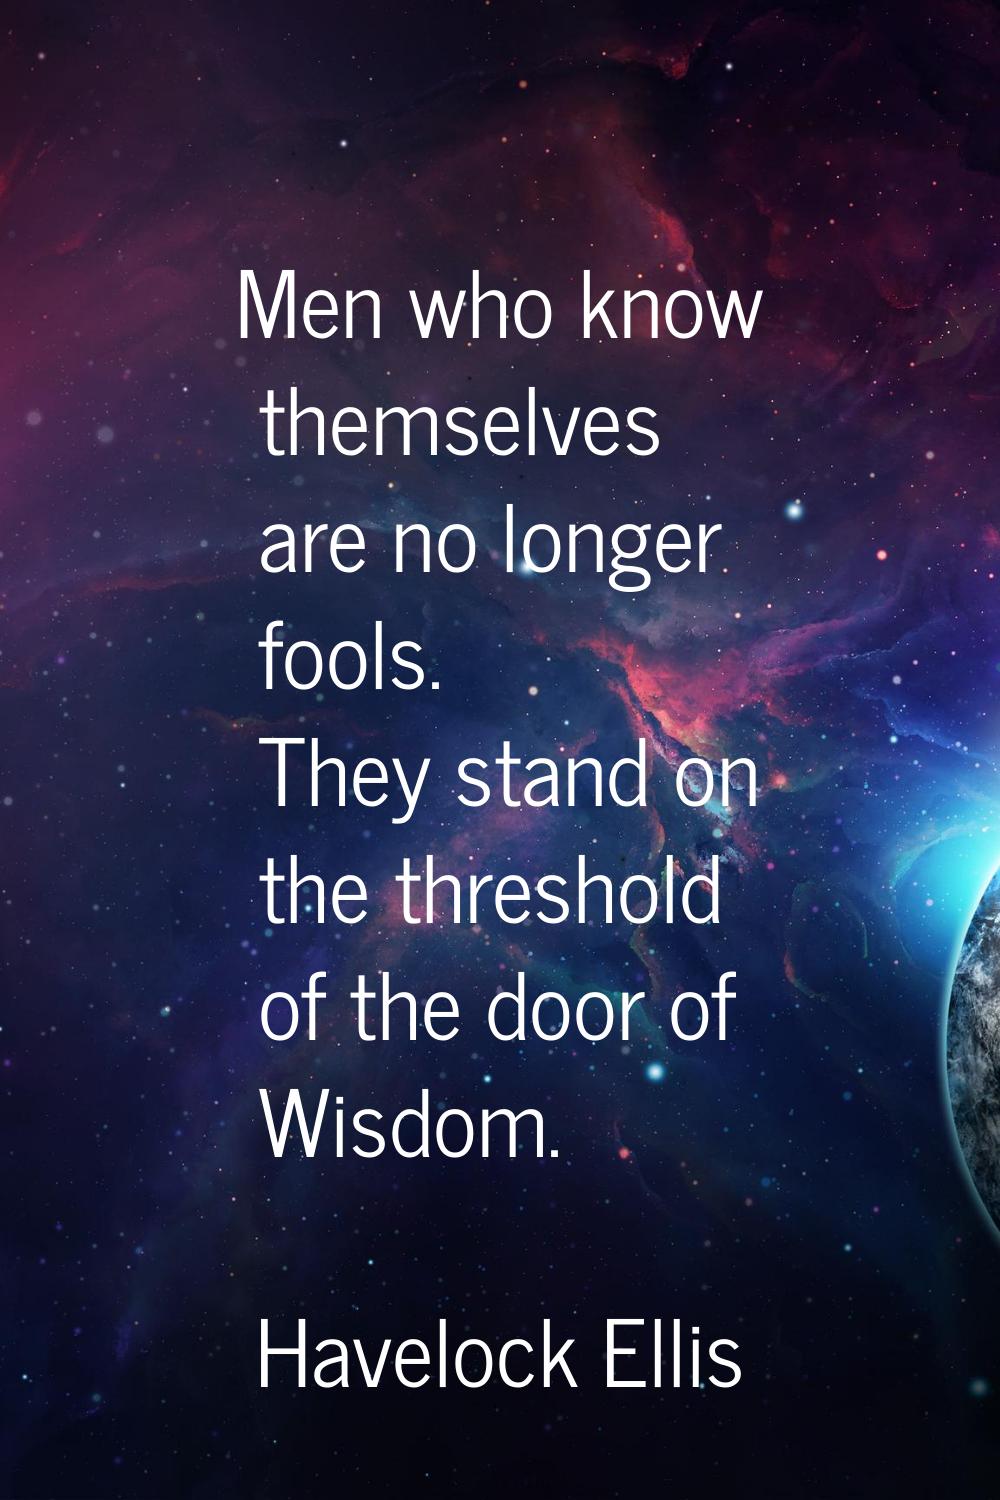 Men who know themselves are no longer fools. They stand on the threshold of the door of Wisdom.